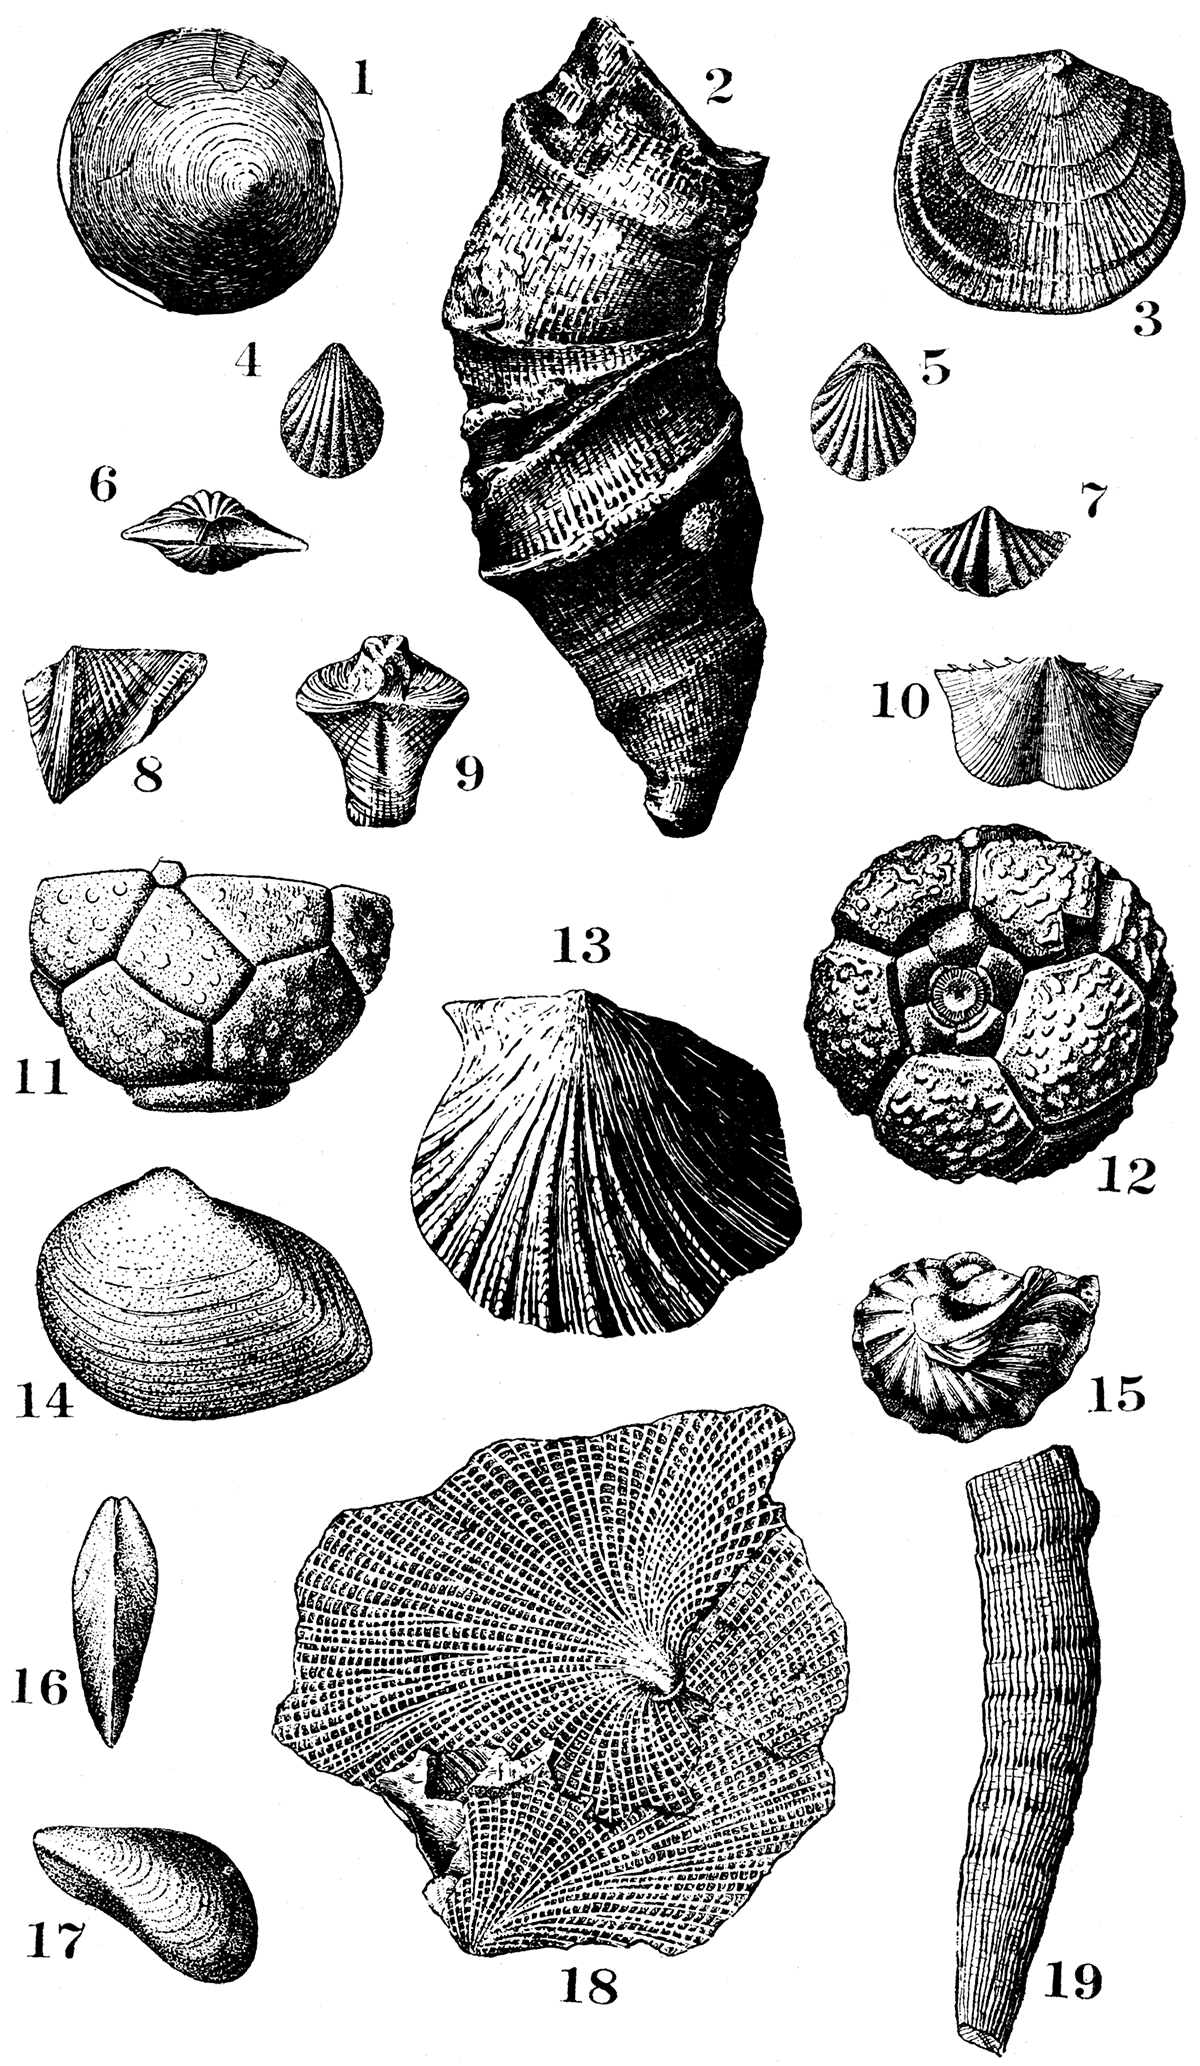 Typical fossils of the Kansas City formation.